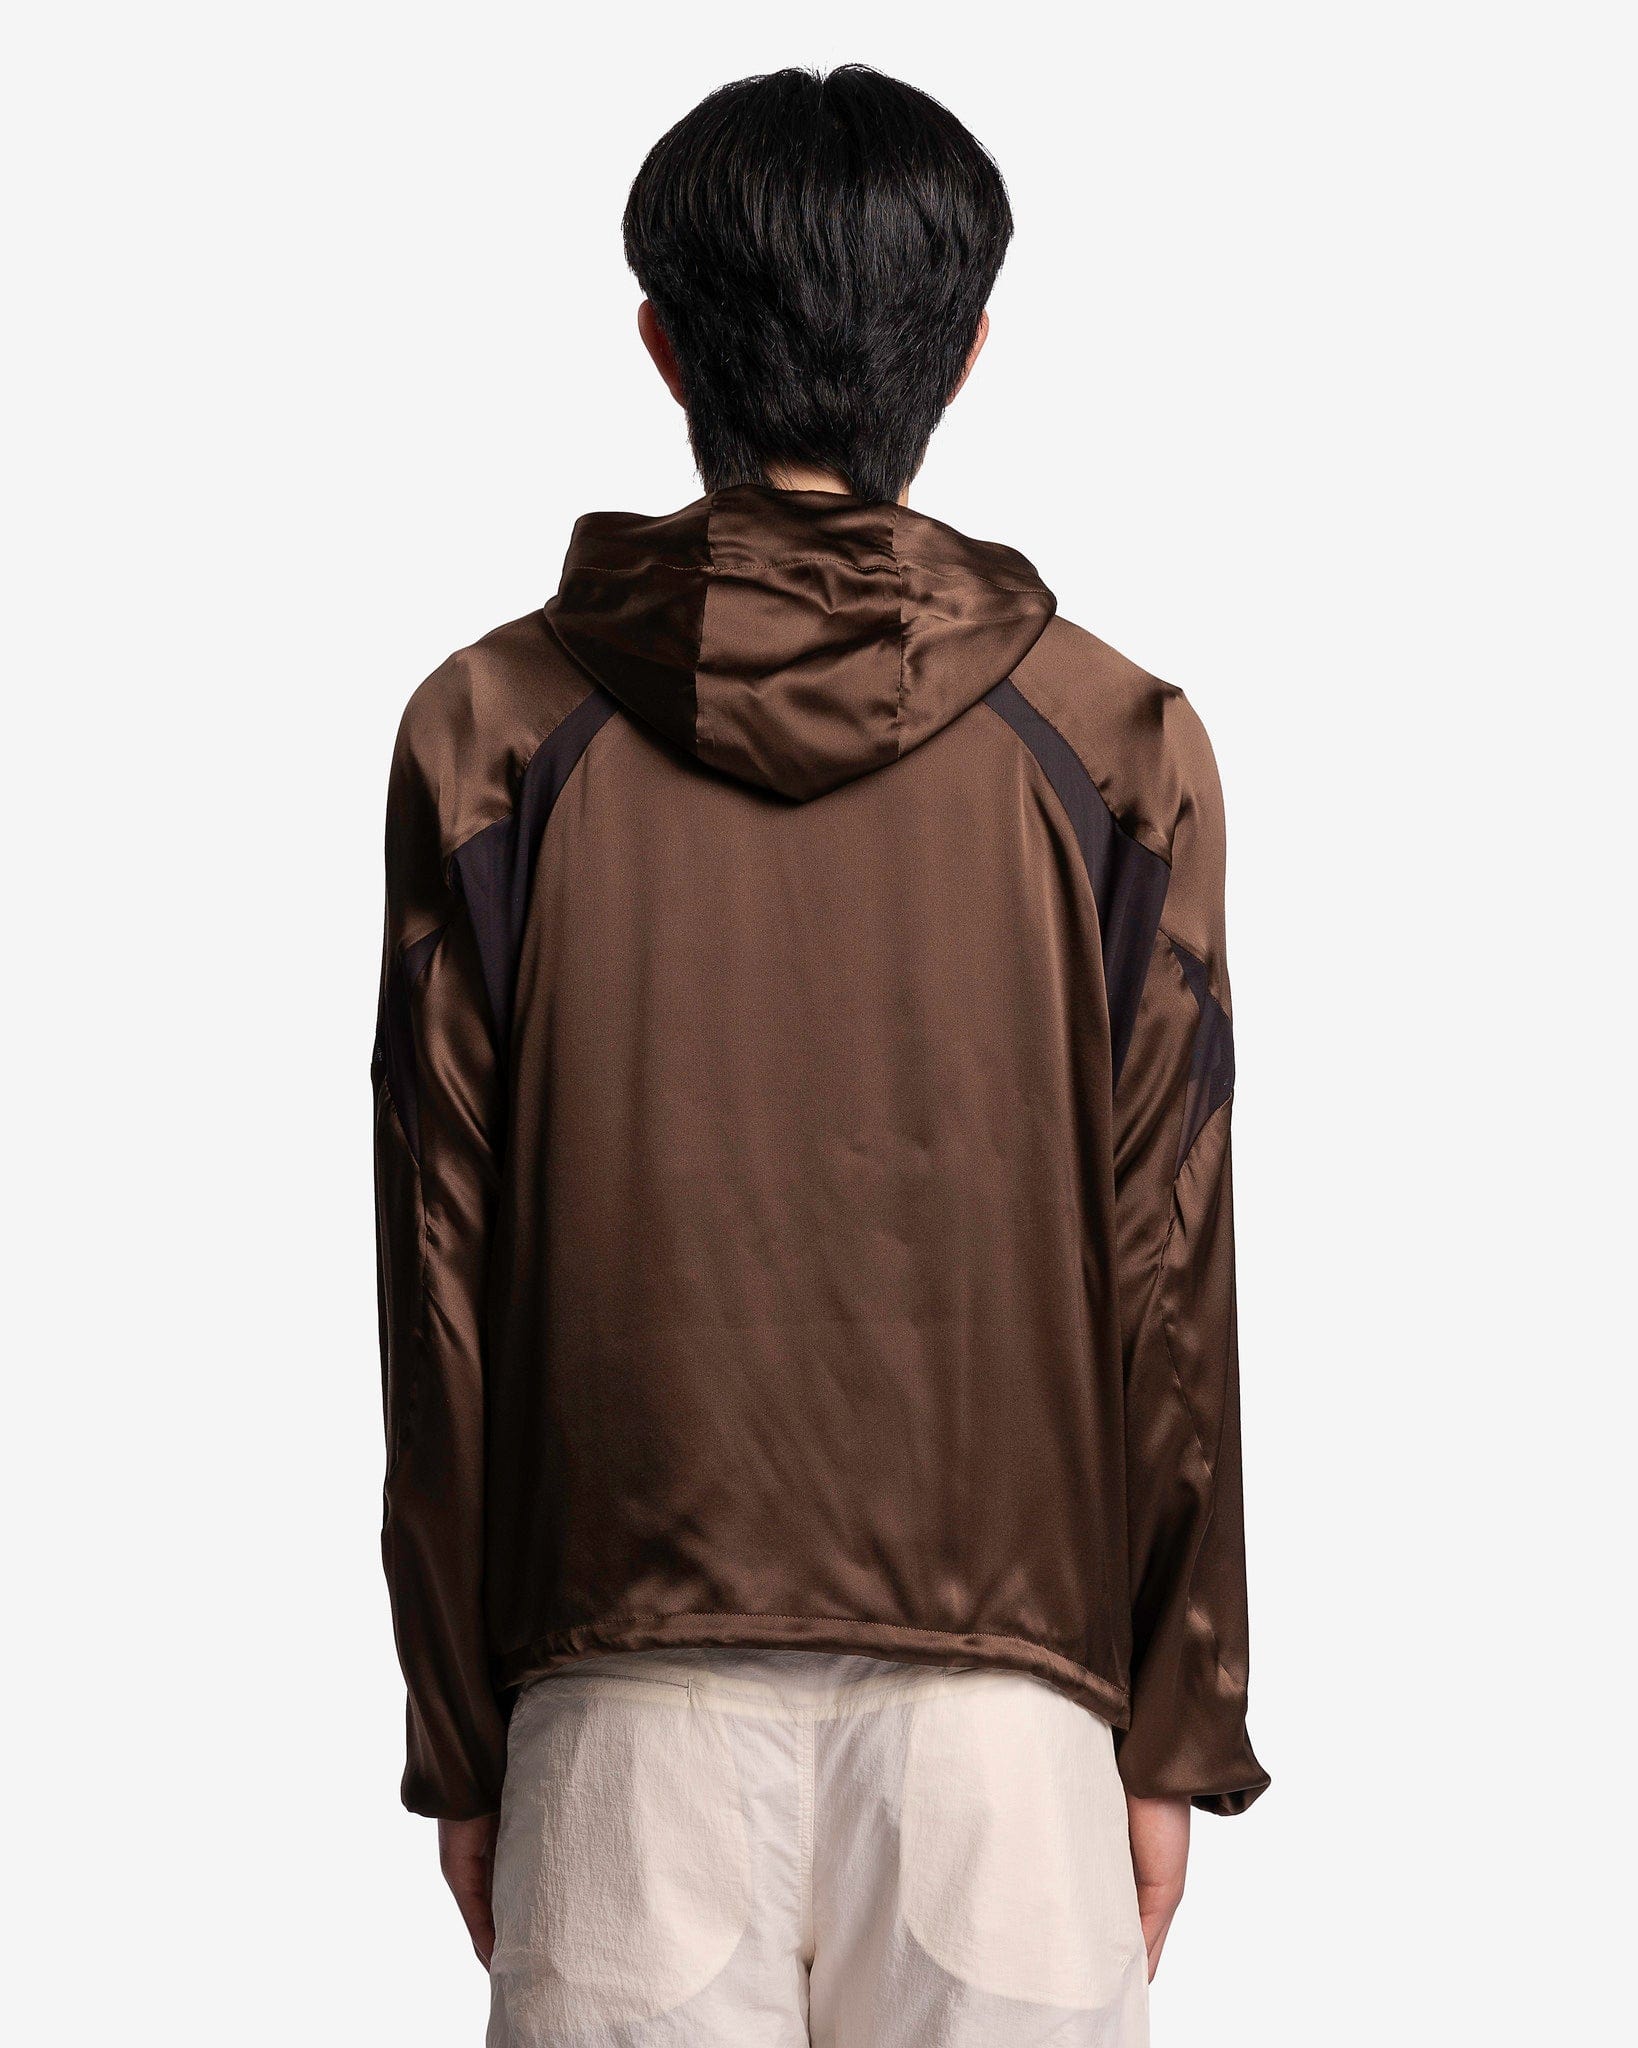 POST ARCHIVE FACTION (P.A.F) Men's Jackets 5.0+ Technical Jacket Right in Silk Brown